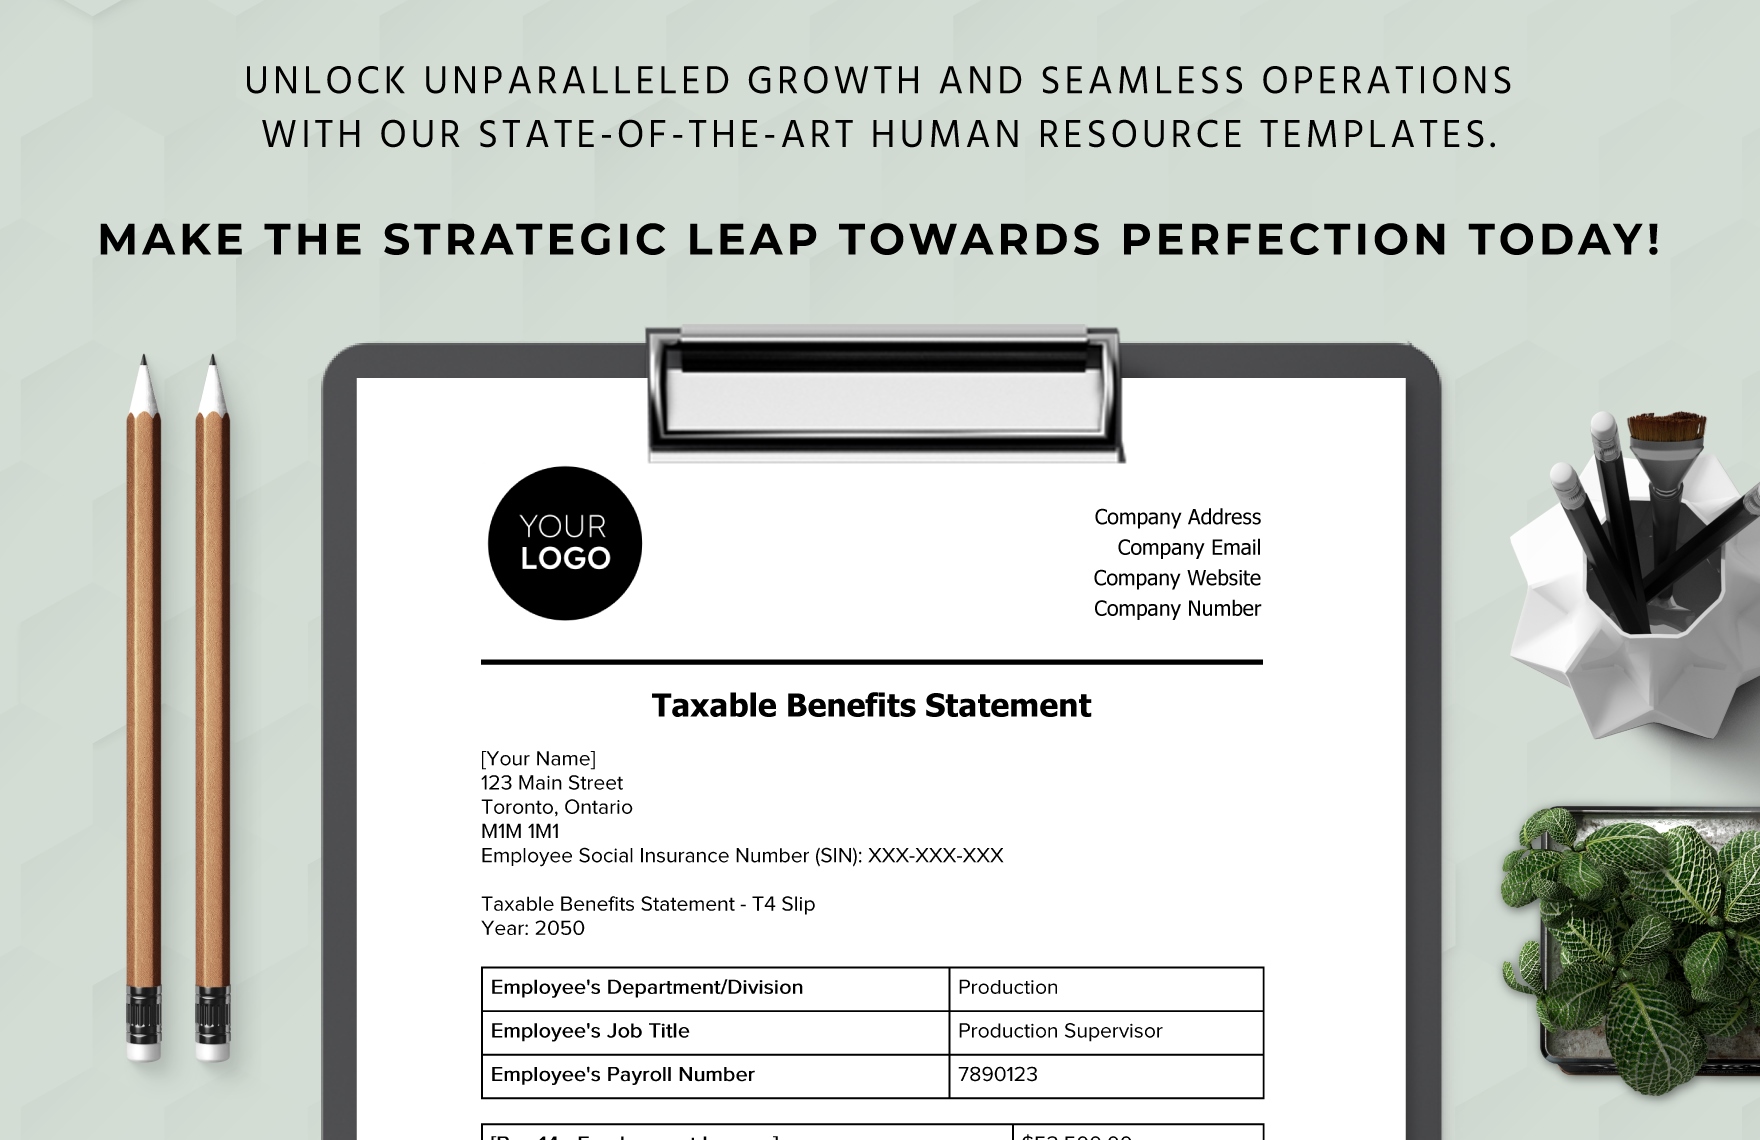 Taxable Benefits Statement HR Template